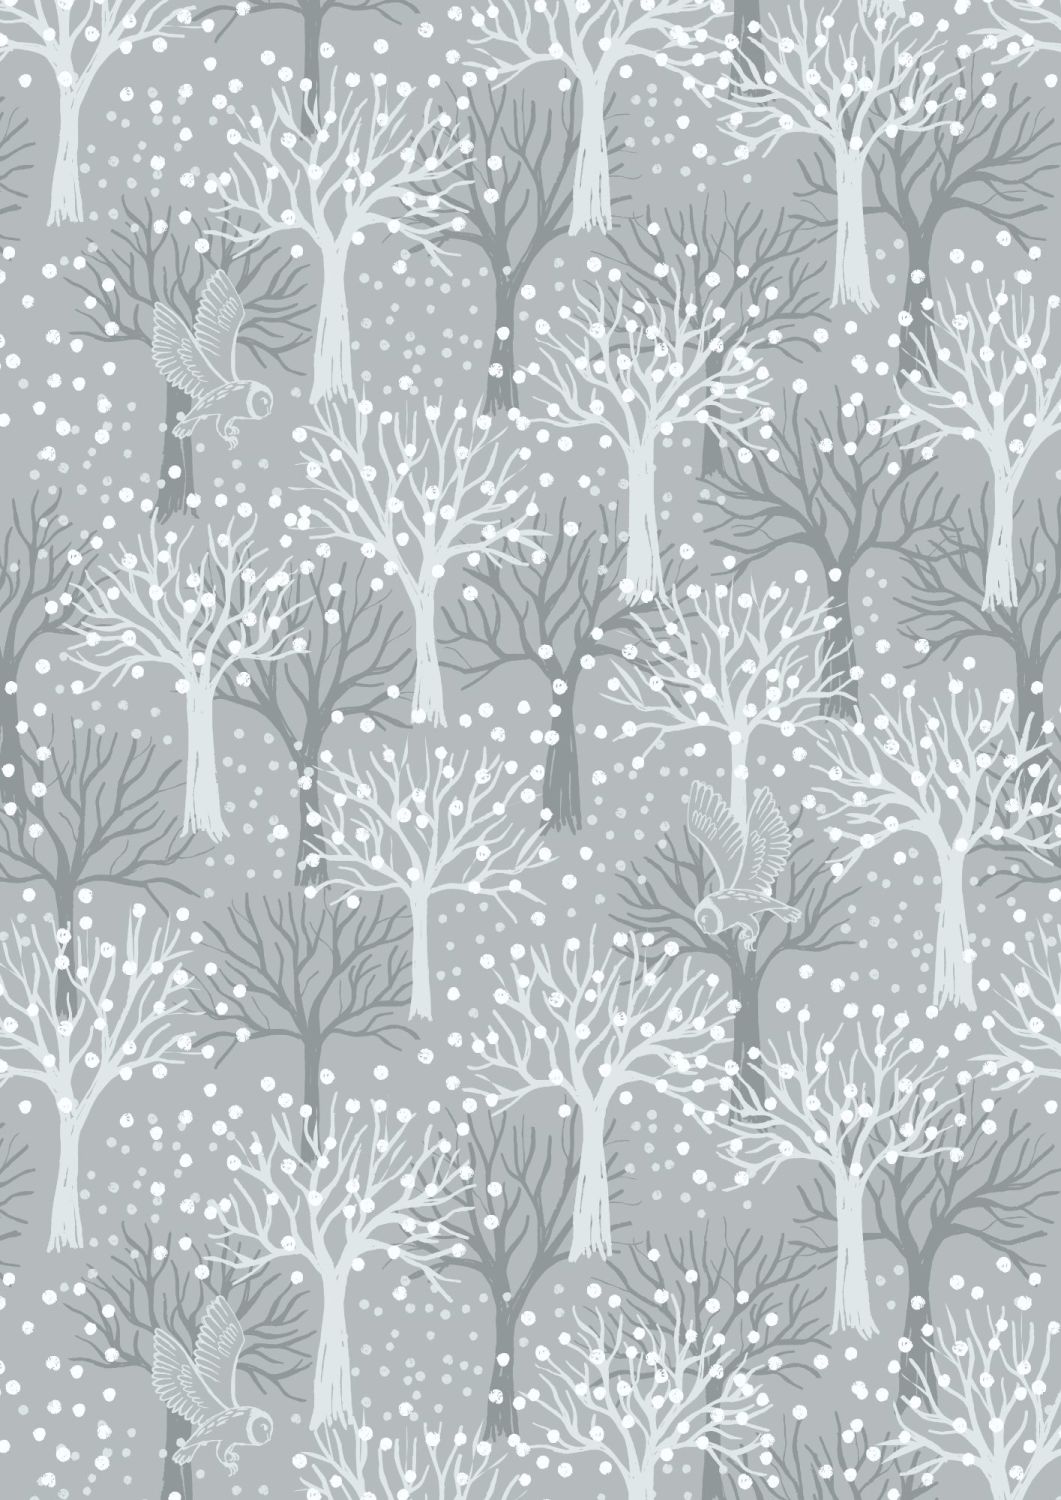 Lewis and Irene - Secret Winter Garden - Owl Orchard on Light Grey with Pea